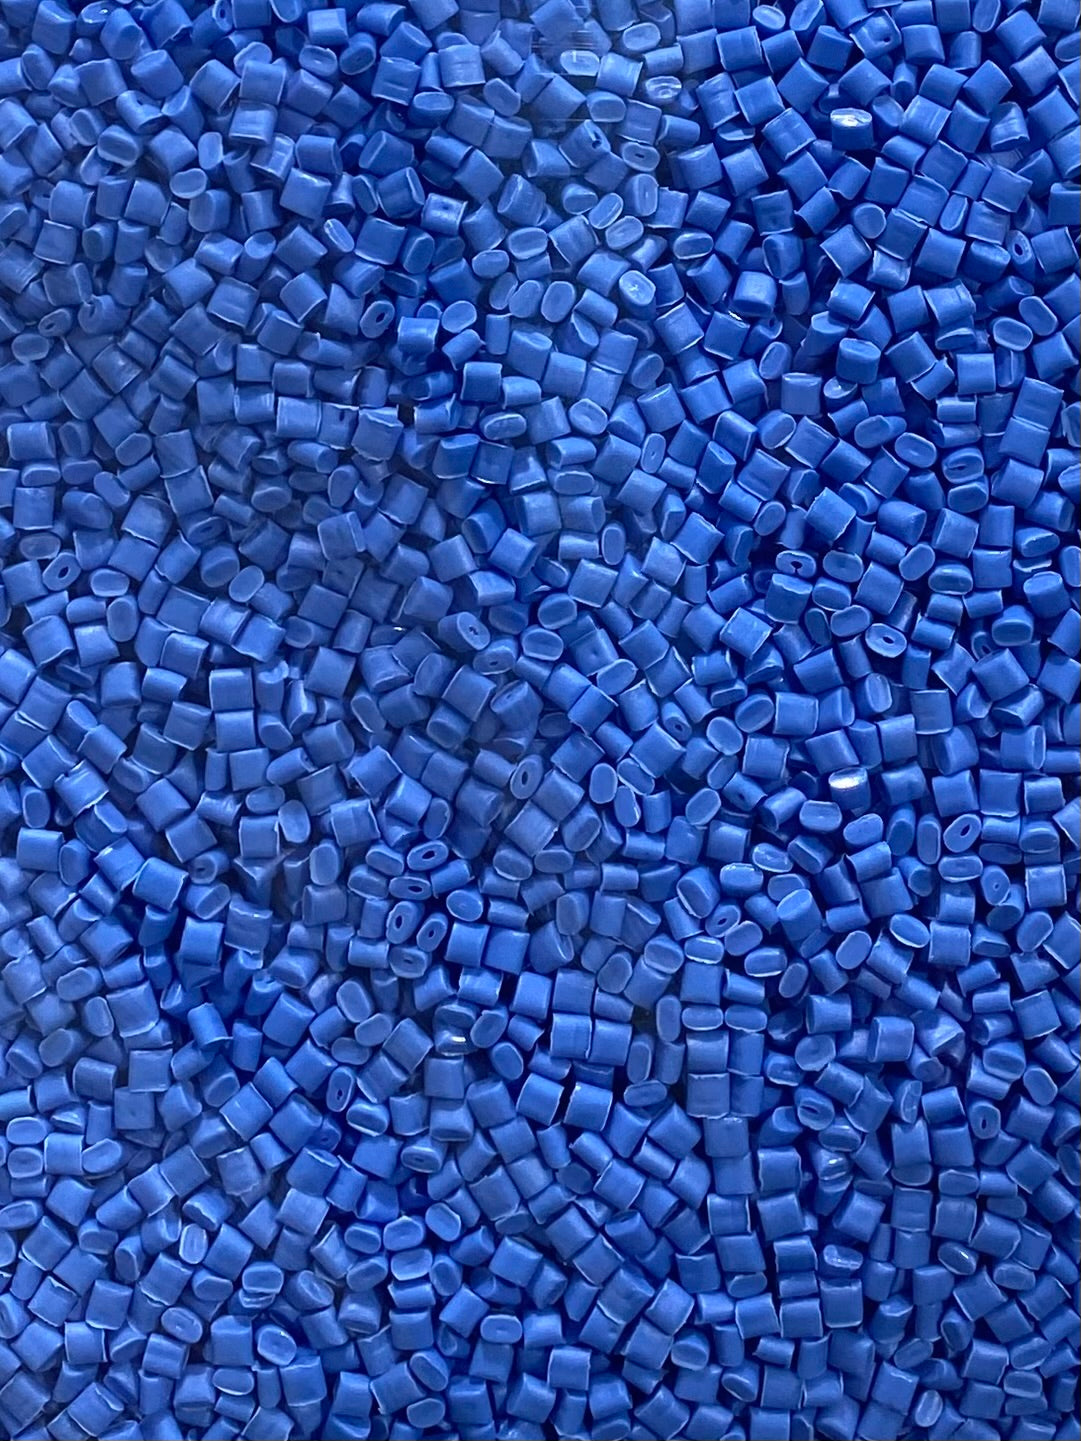 Pellets - Recycled HDPE or Post Prime Plastic